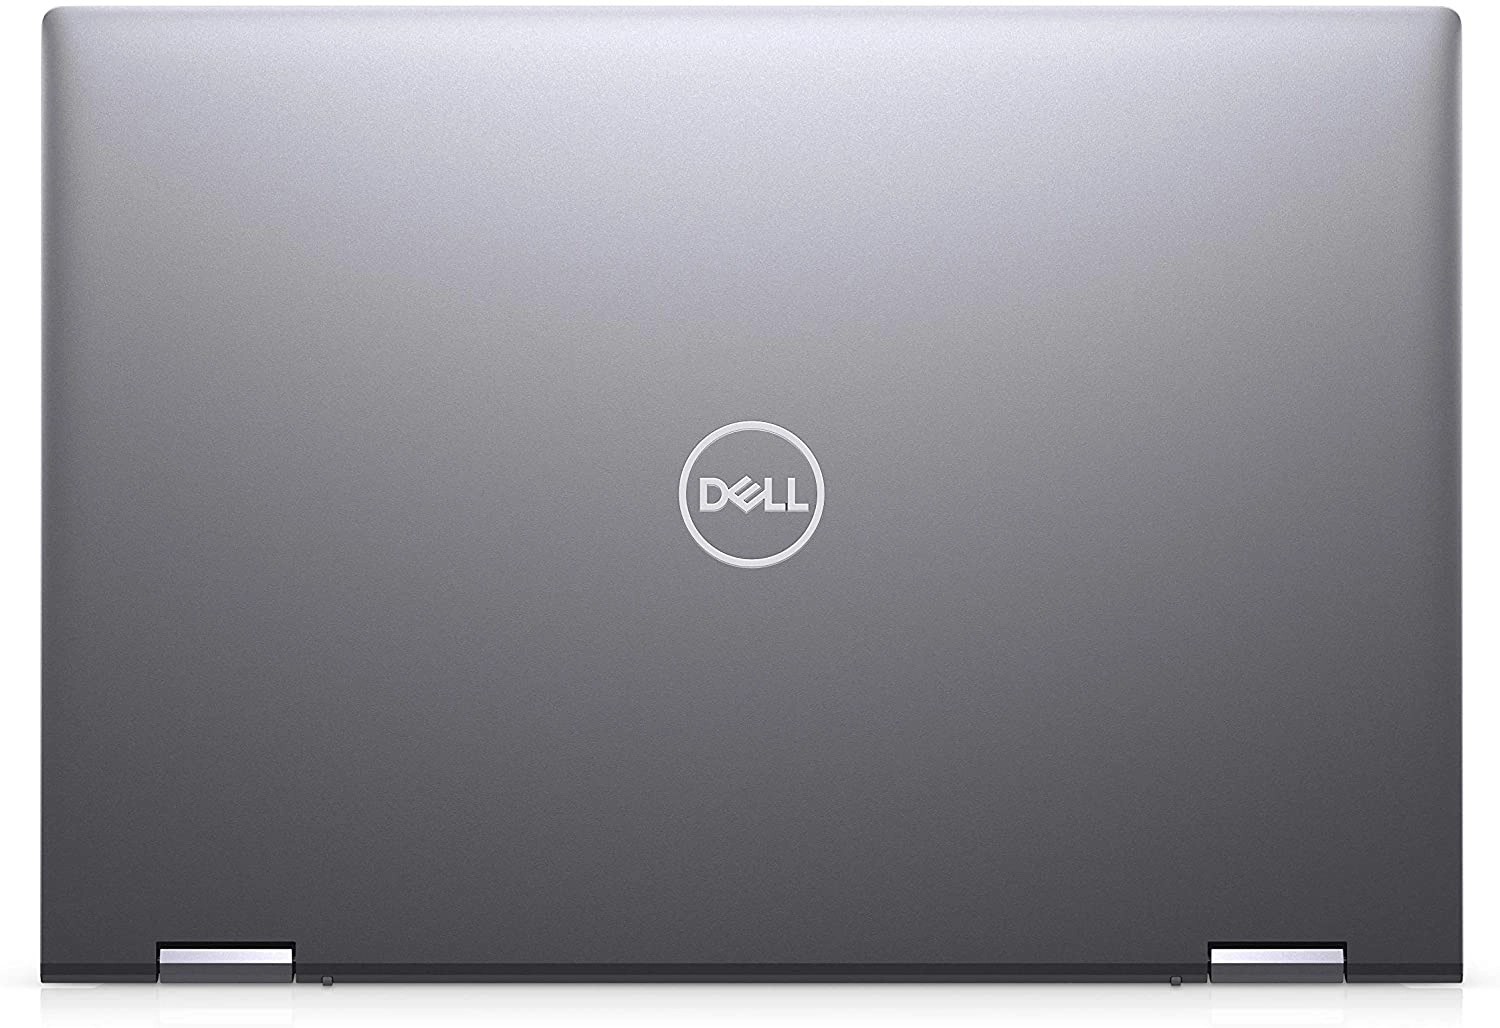 Dell I5400-7128GRY-PUS laptop image